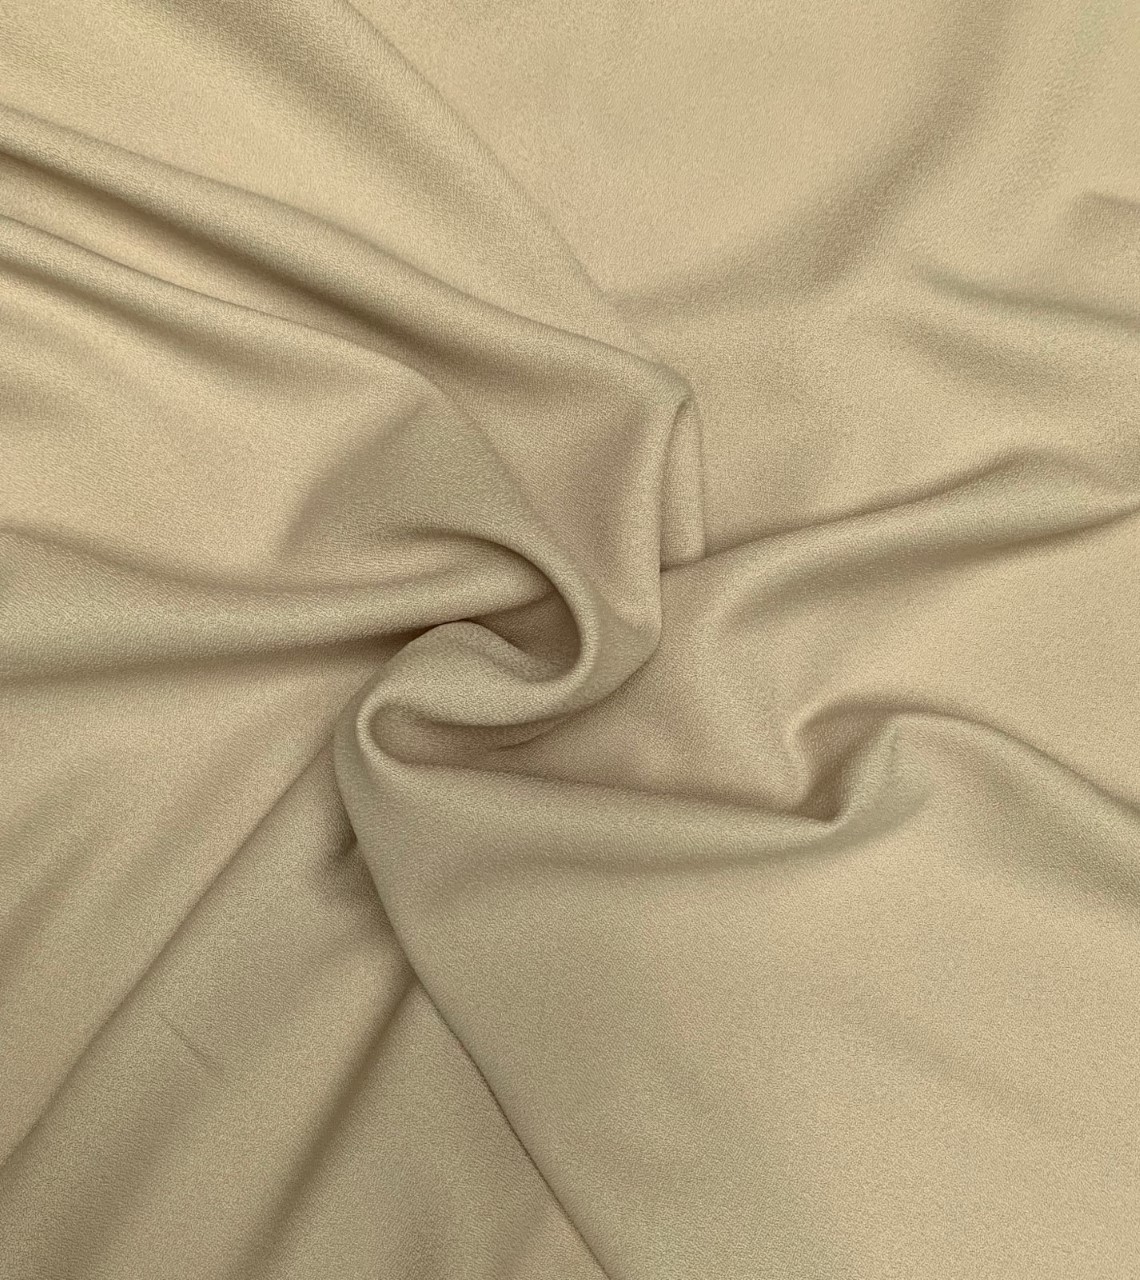 Khaki Crepe Fabric 60" By the yard (100% polyester)